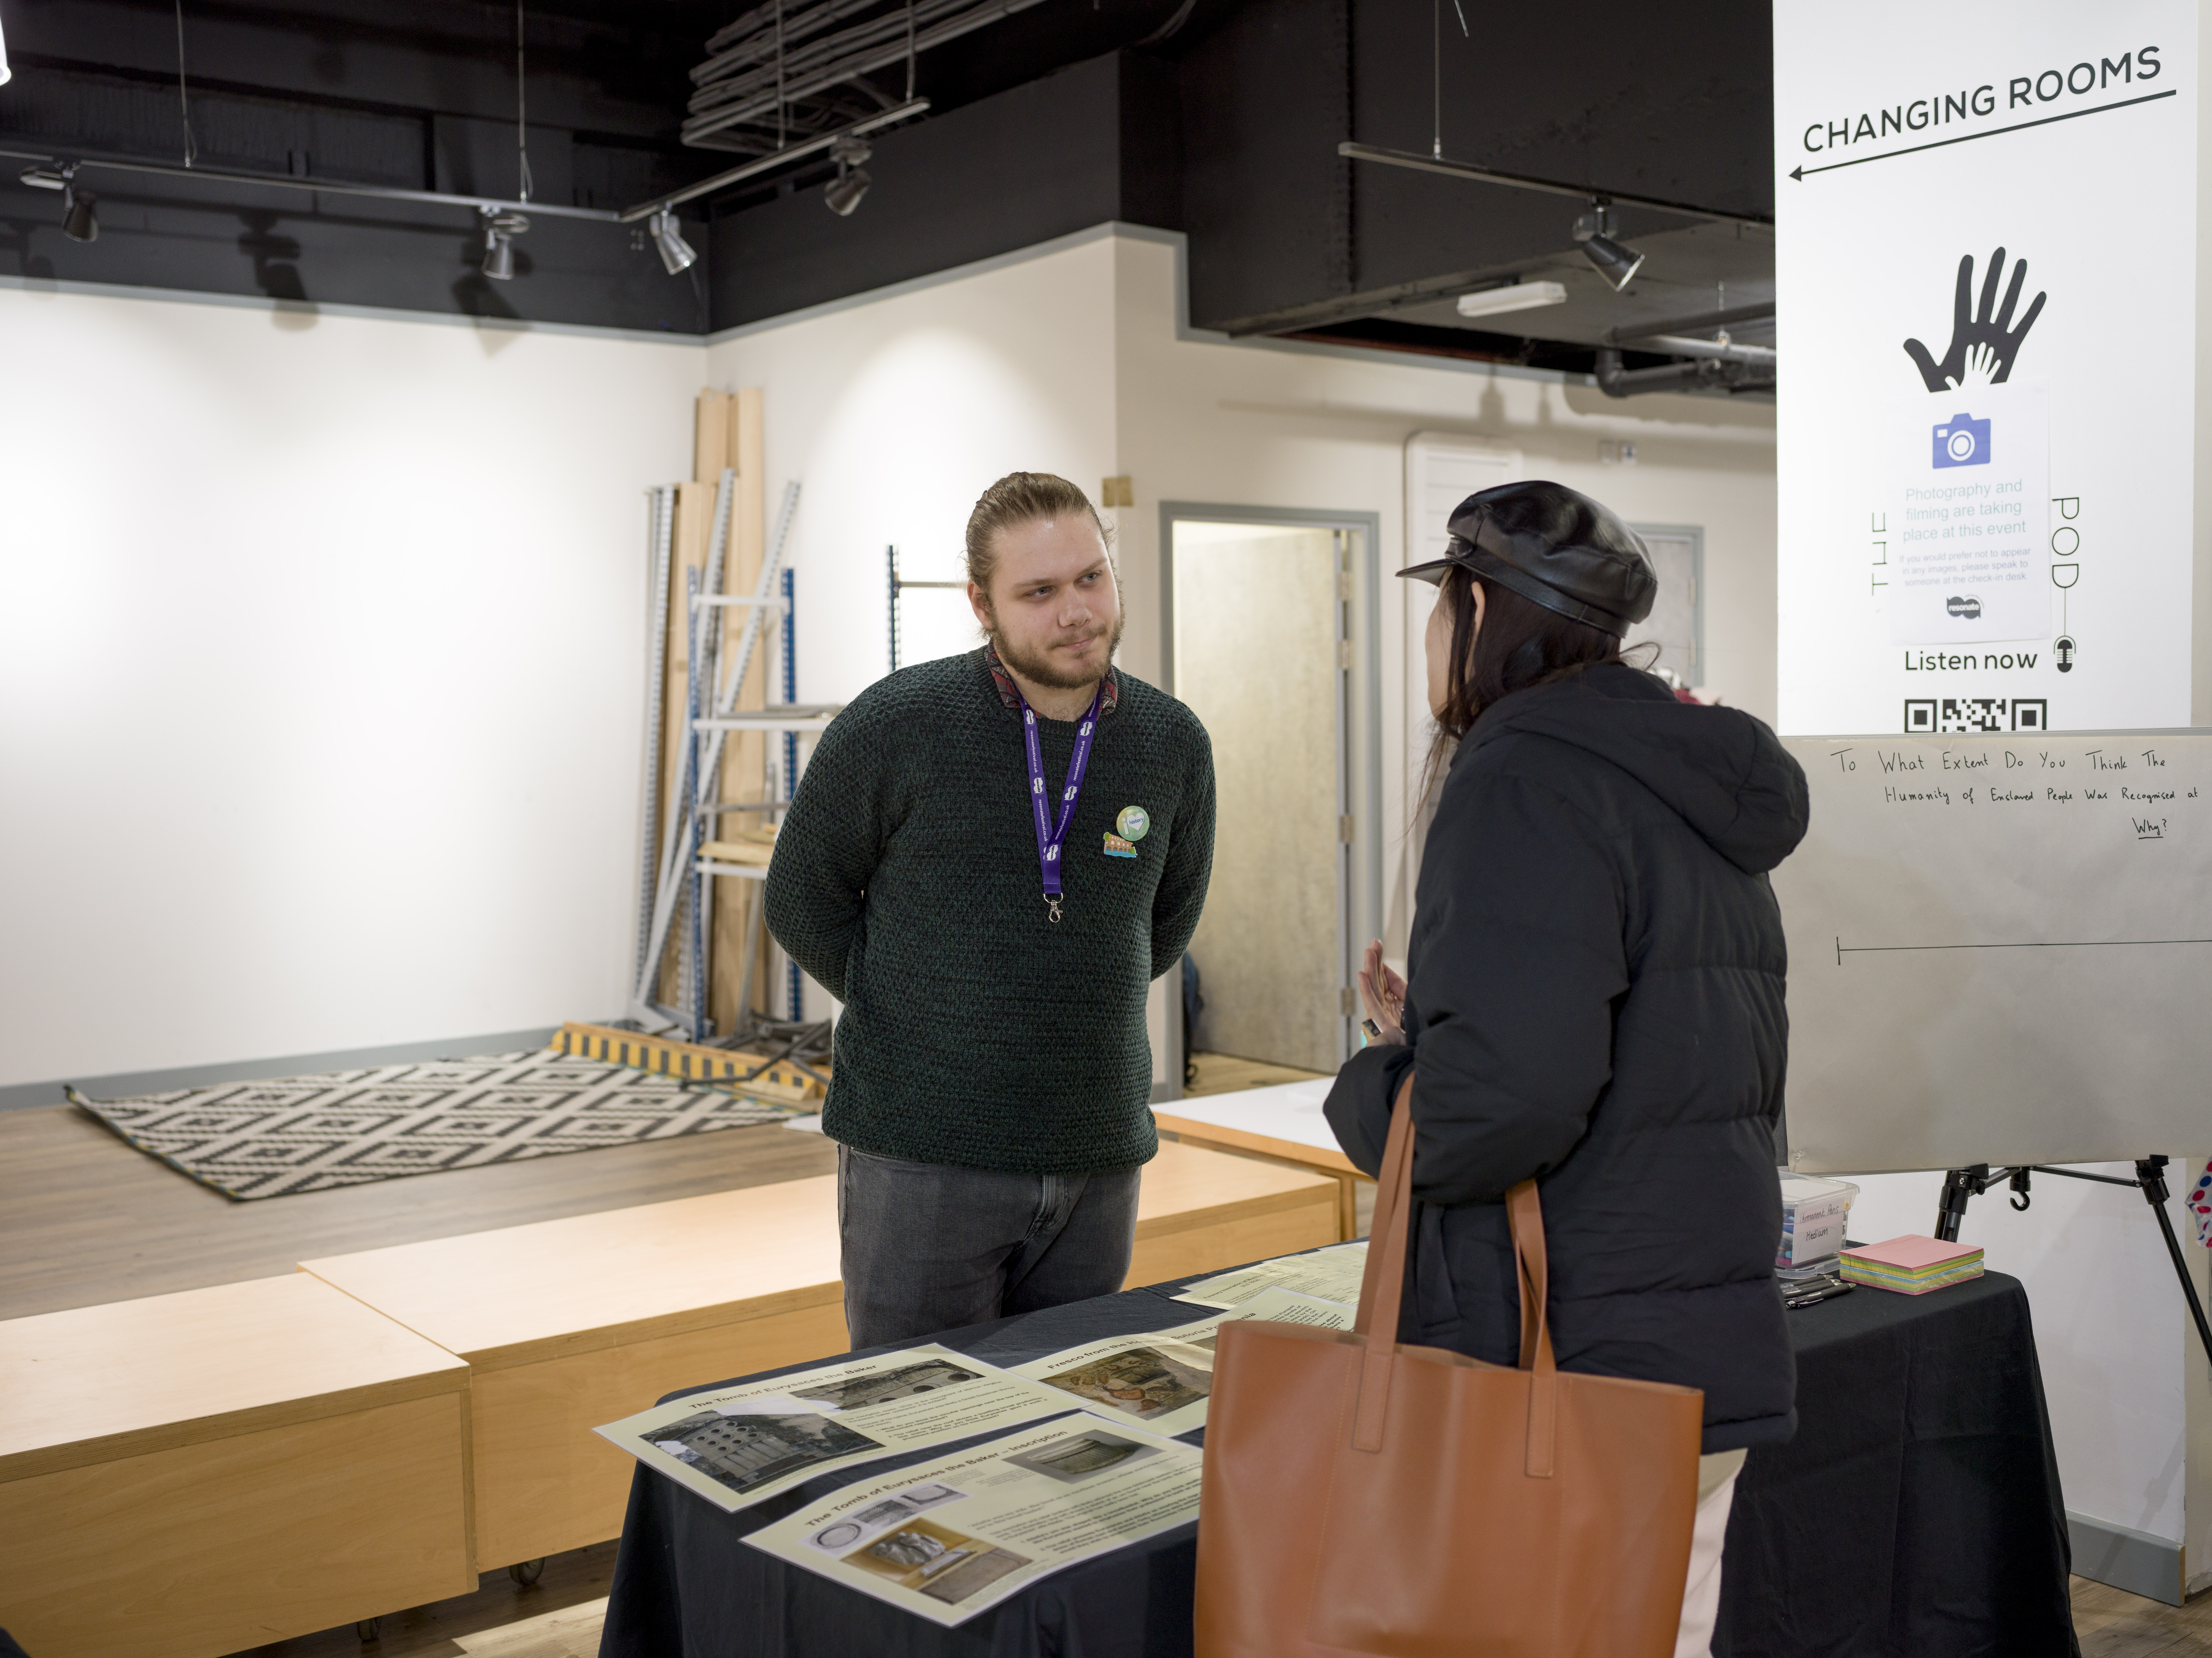 A student talks to a visitor over a table that displays pictures of ancient sources and monuments.